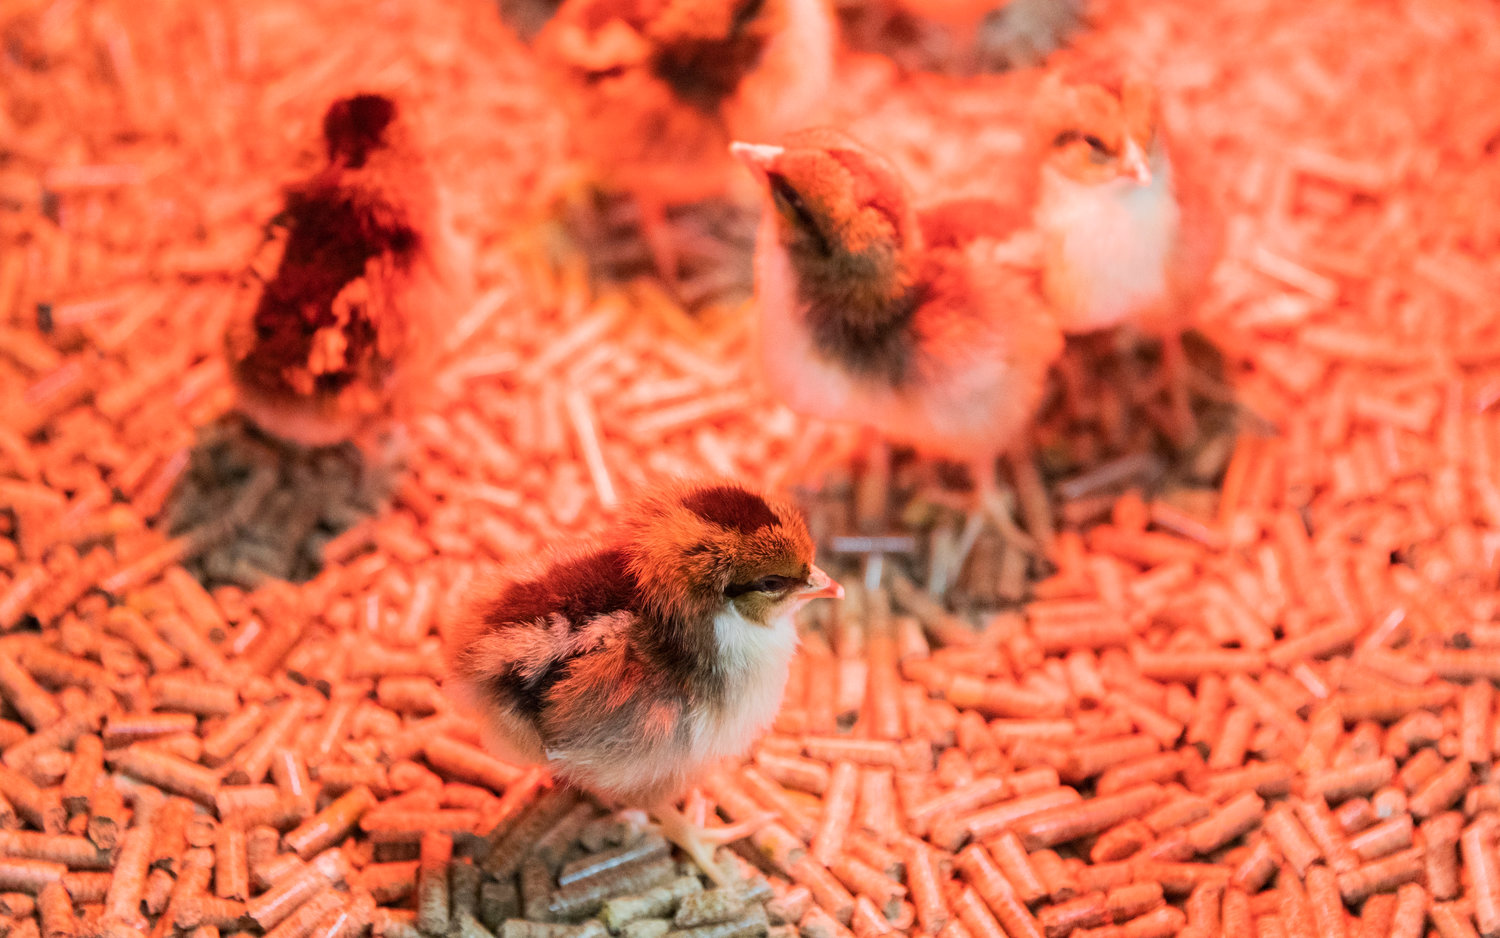 Just days old, chicks in the Farm Store on Thursday examine the world around them.